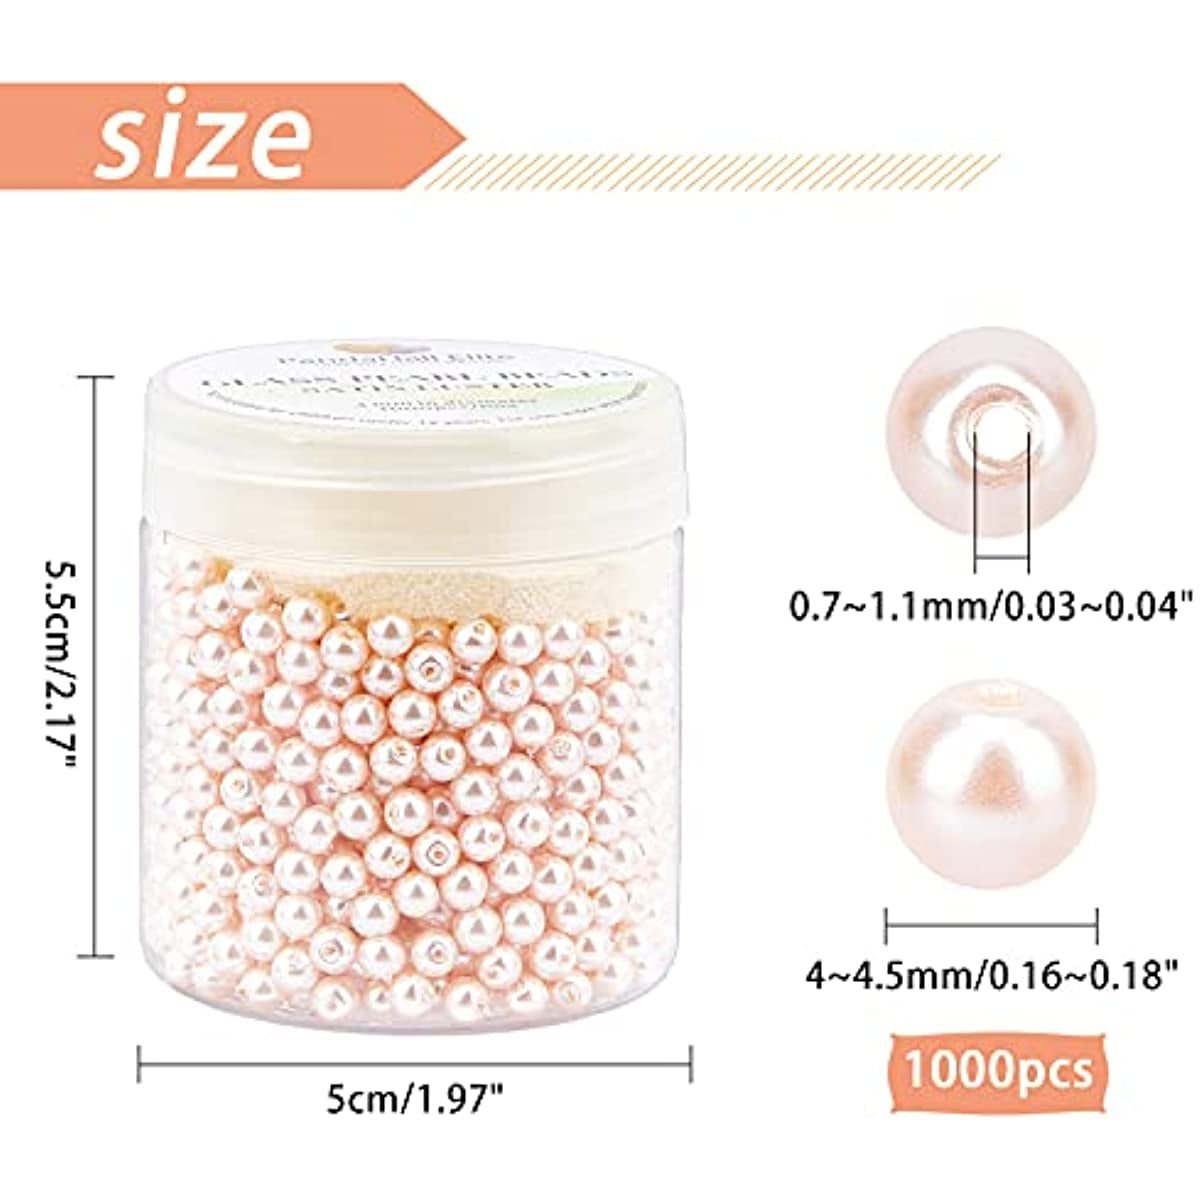  UUYYEO 1000 Pcs 4mm Round Faux Pearl Beads Sew on Pearls  Jewelry Making Pearl Beads Vase Filler Pearls Loose Spacer Beads with Holes  Black : Arts, Crafts & Sewing